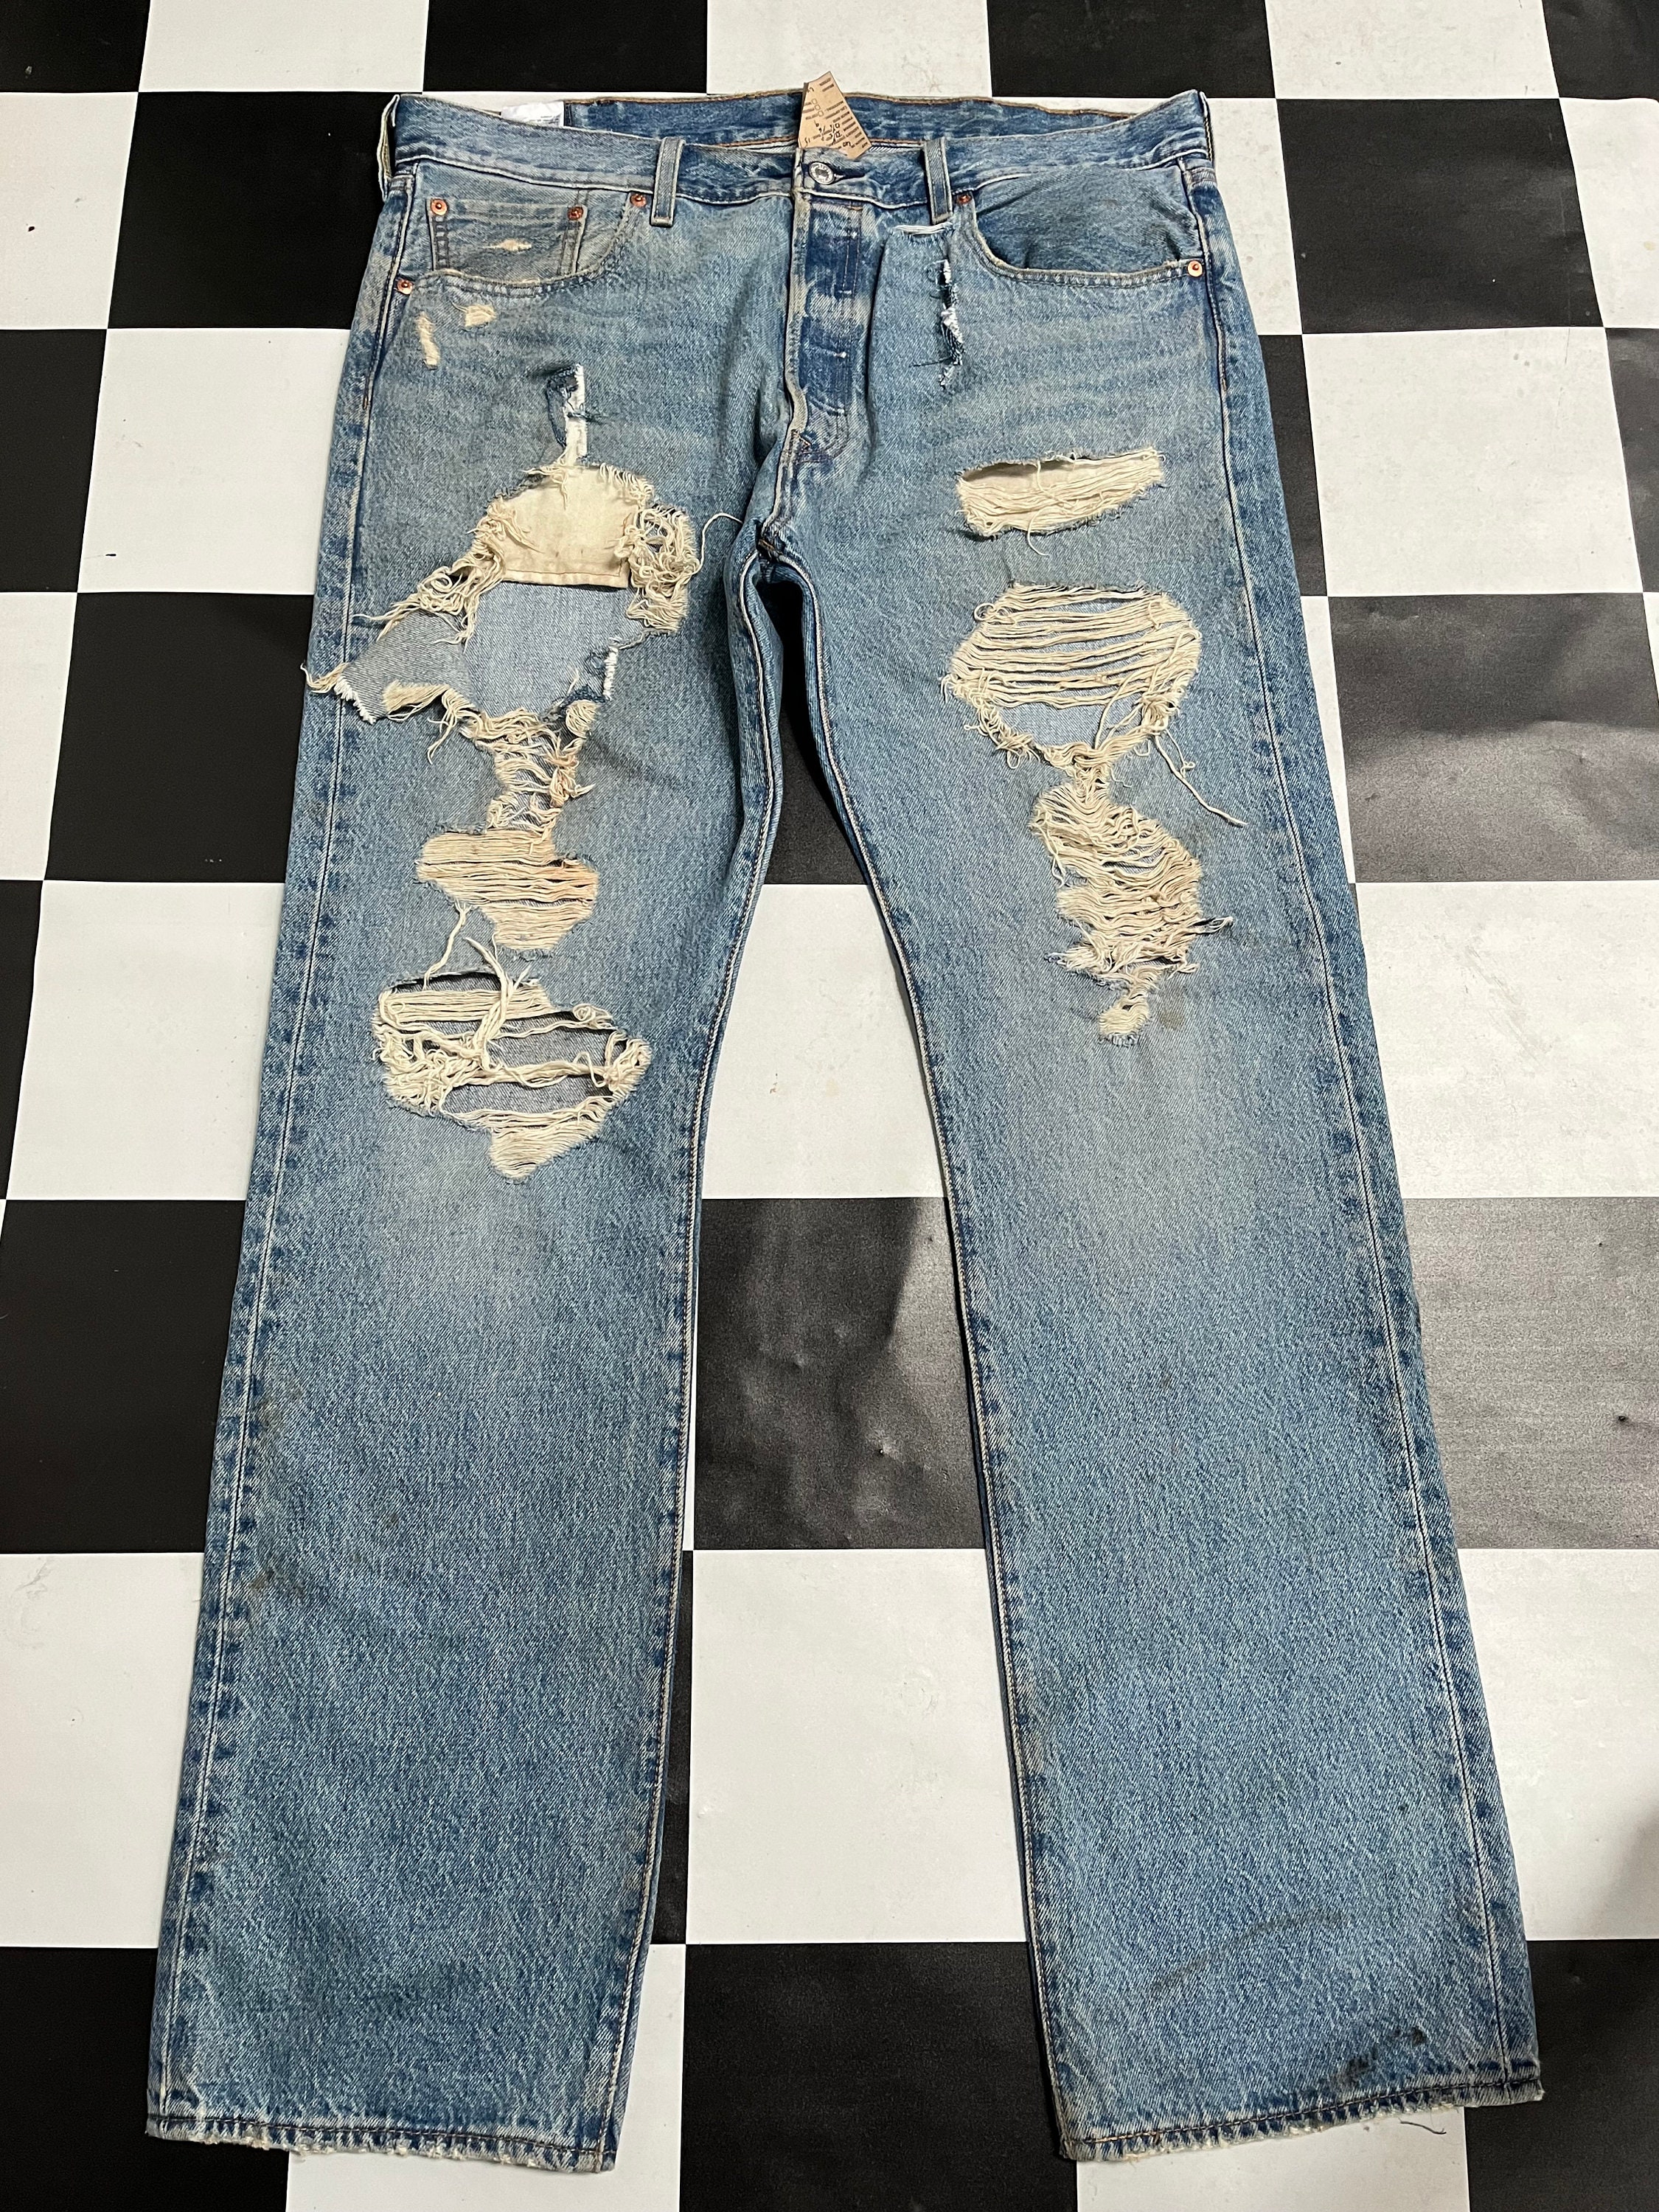 Vintage Levis 501 Ripped Jeansdistressed Jeans Light Wash - Etsy Norway